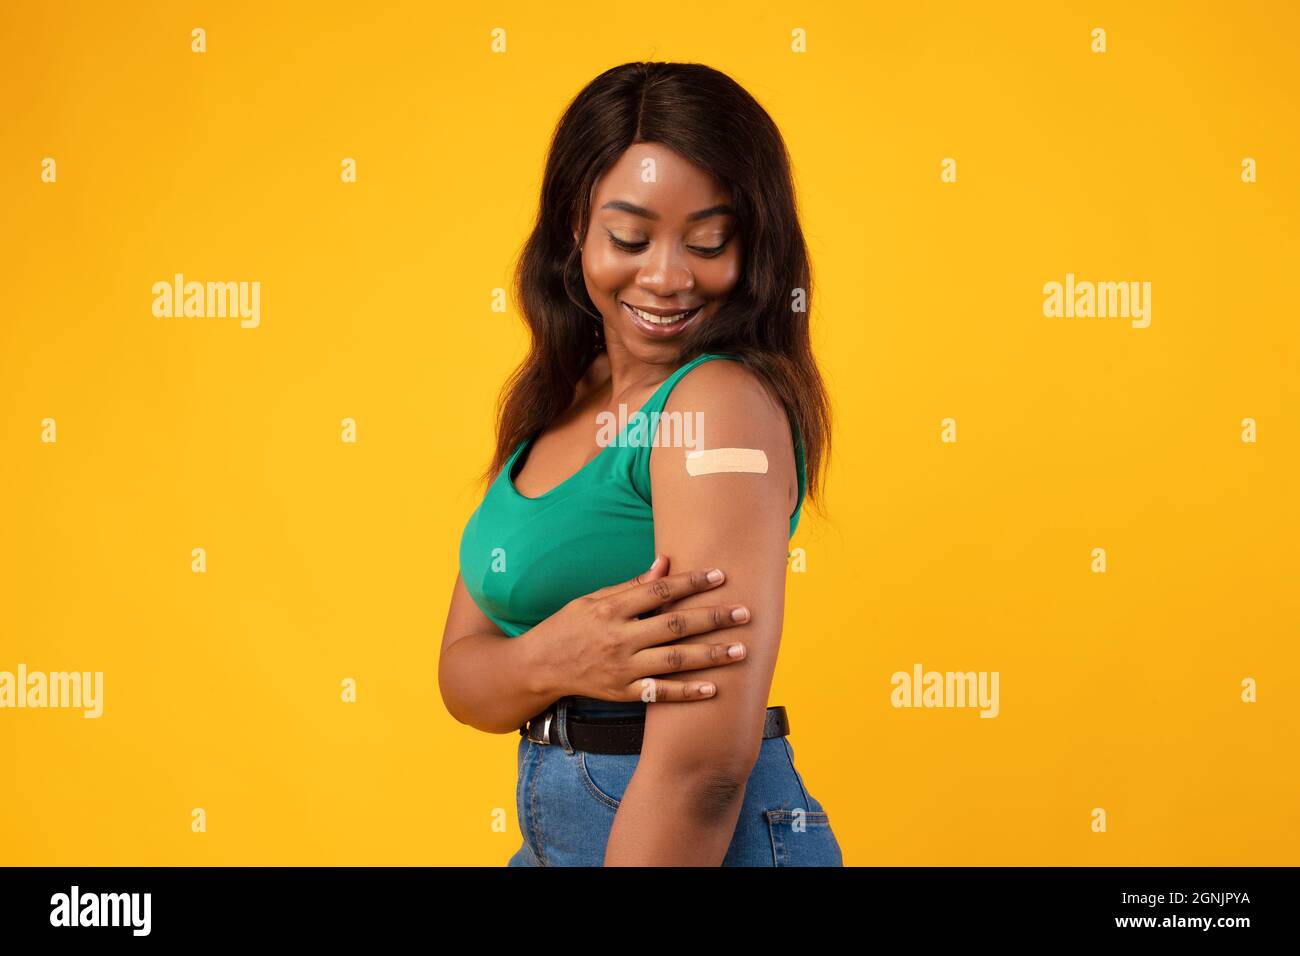 African American Woman Vaccinated Against Covid-19 Showing Arm, Yellow Background Stock Photo